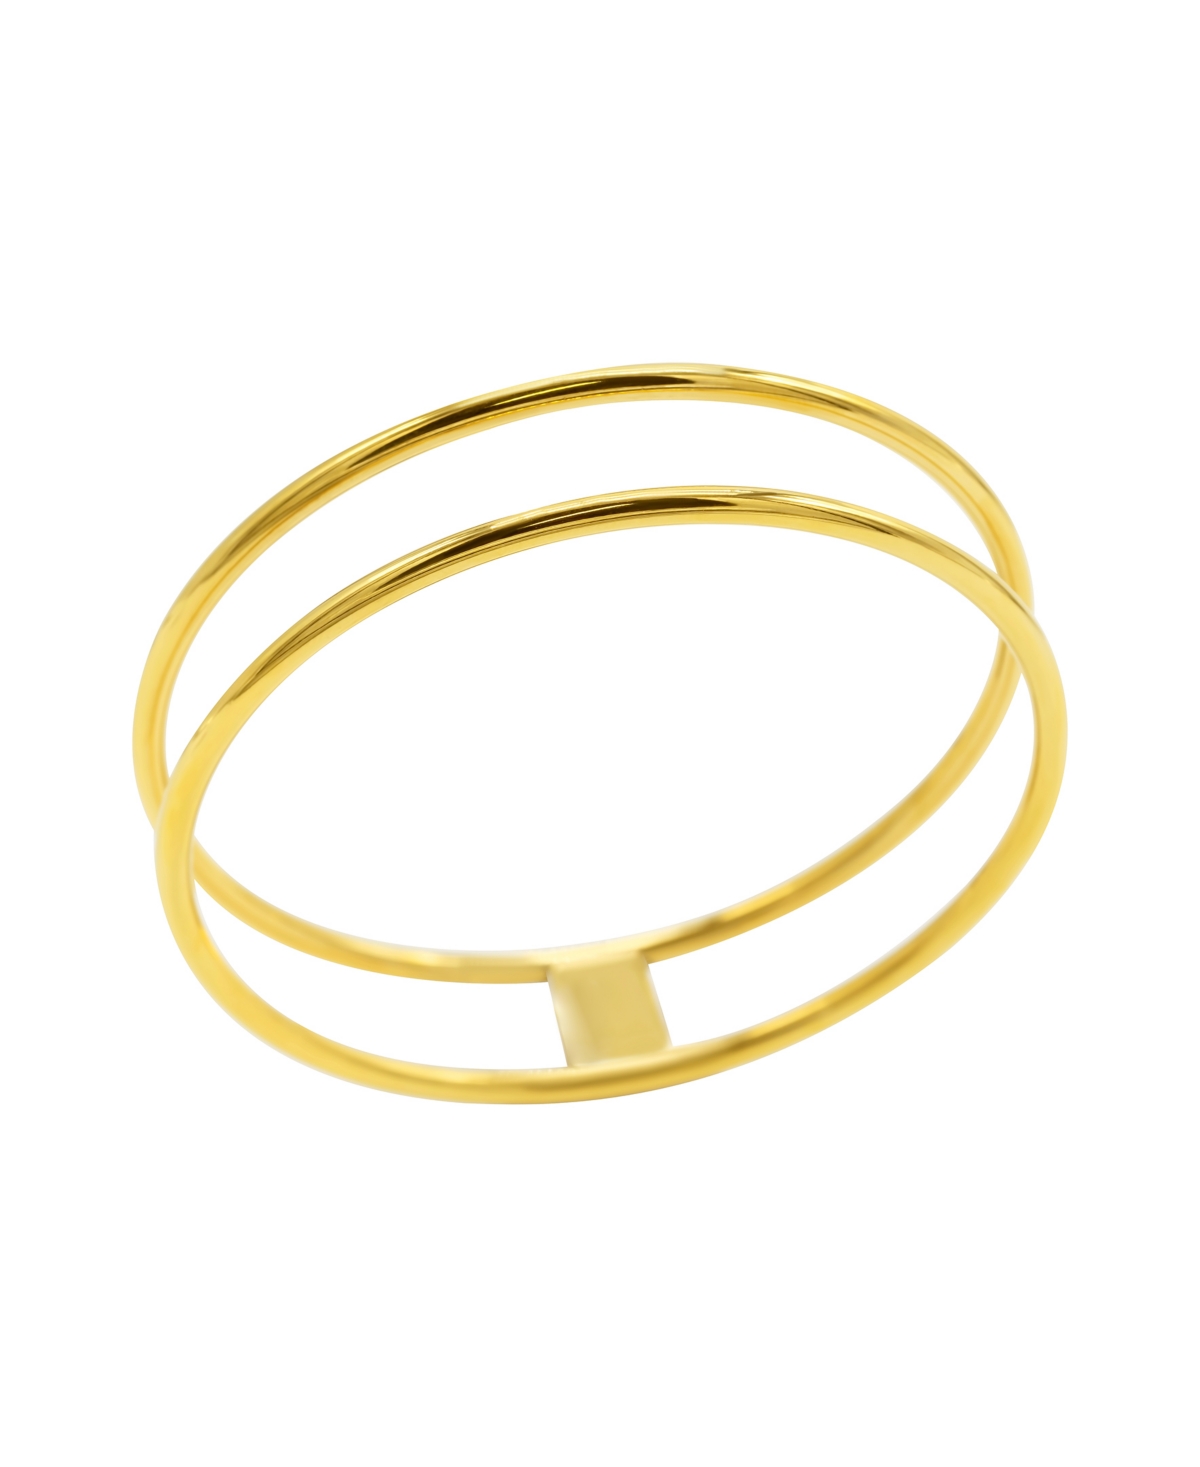 Shop Adornia Tarnish Resistant 14k Gold-plated Stainless Steel Double Row Bangle Bracelet